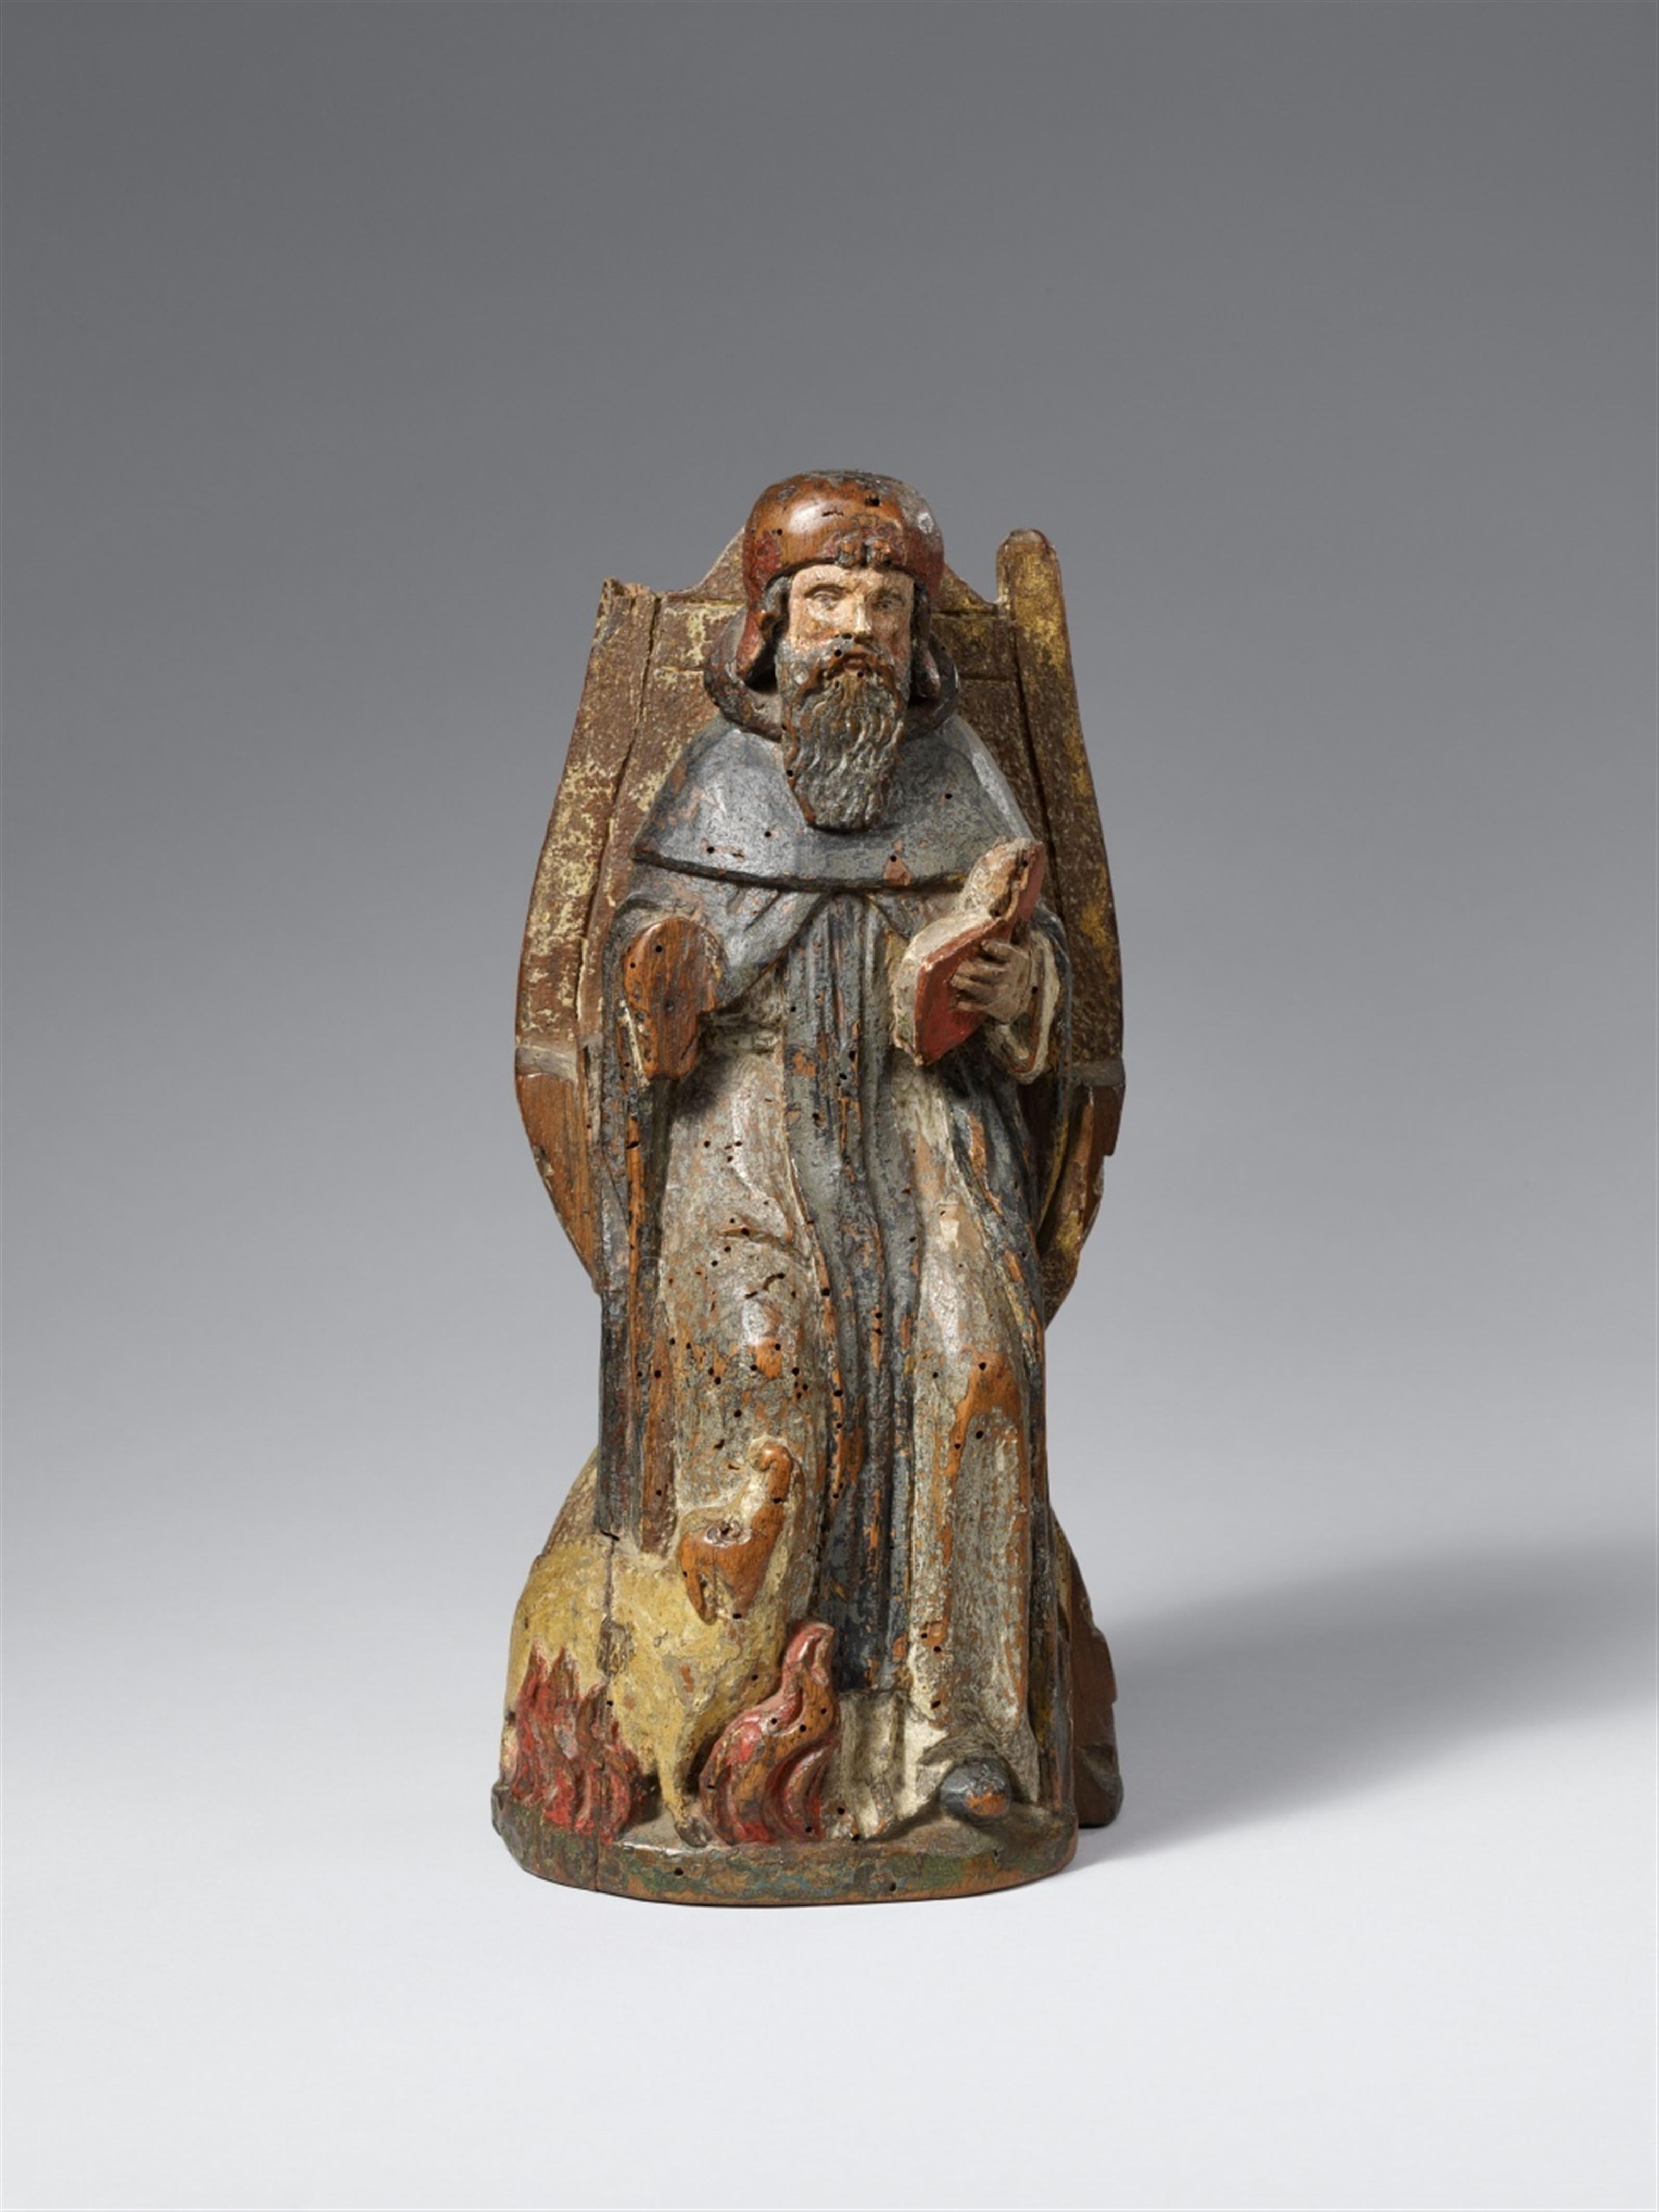 Probably West Germany 2nd half 15th century - A carved wooden figure of Saint Anthony, probably West German, second half 15th century - image-1